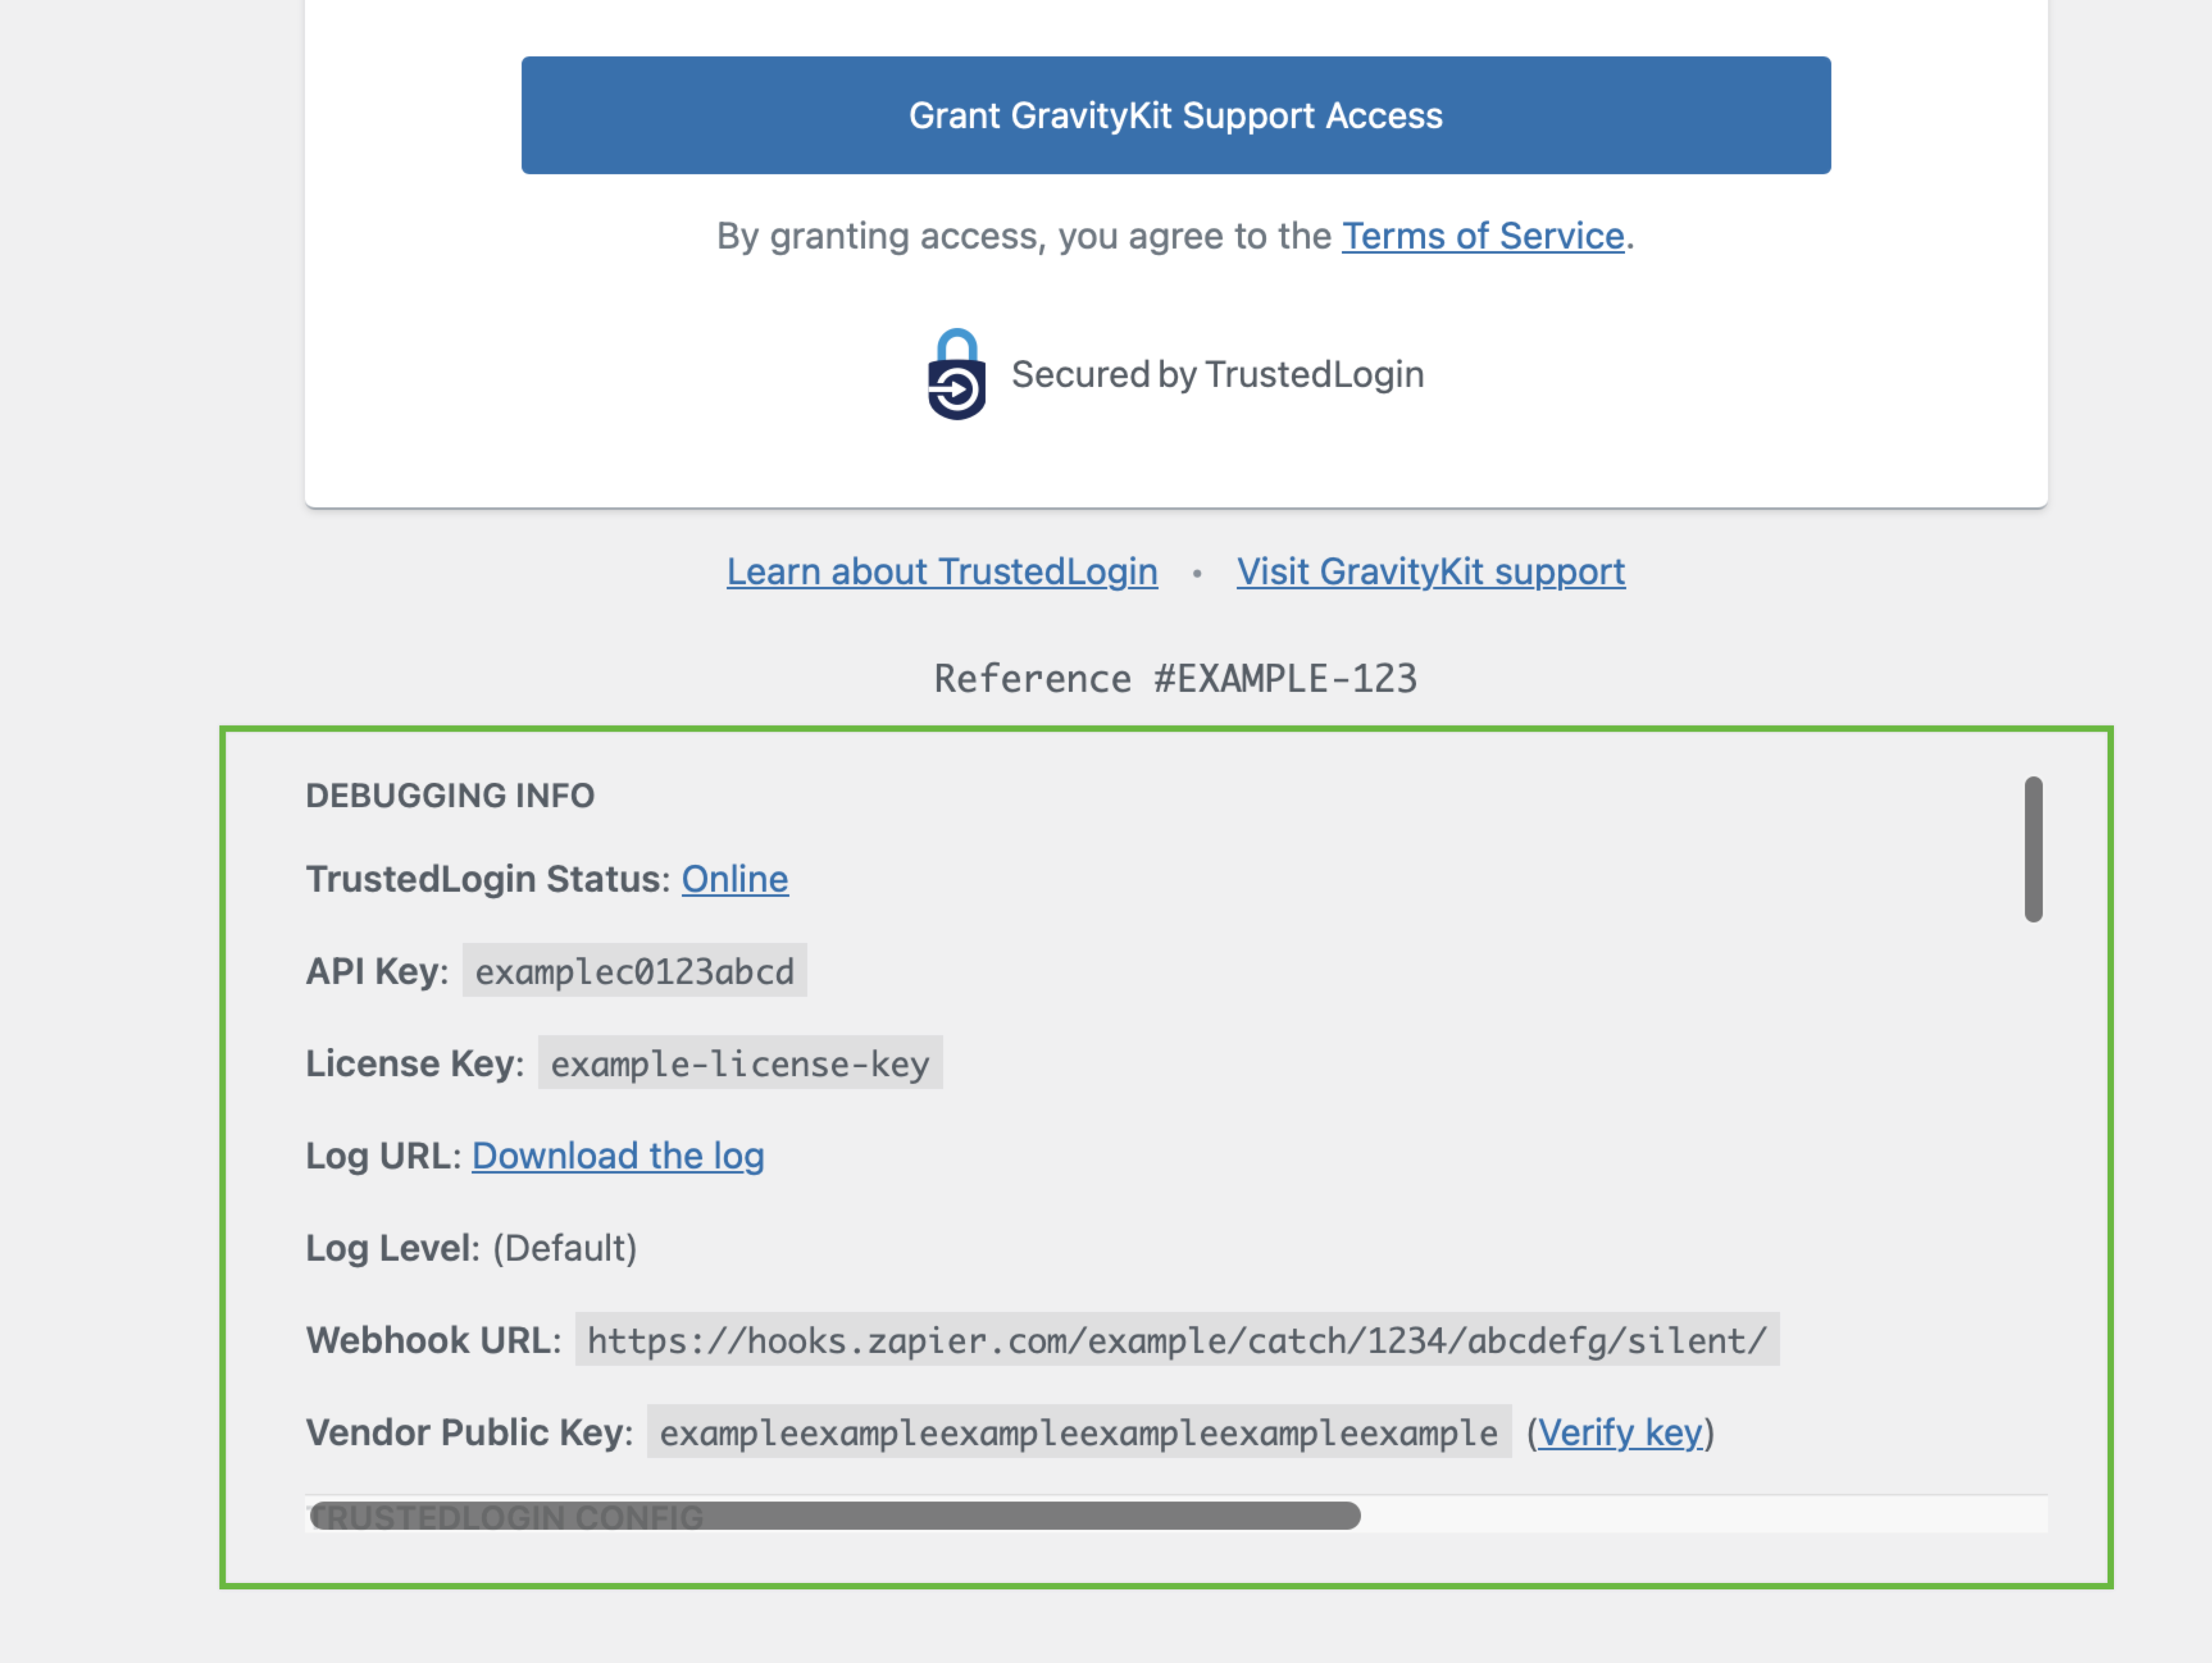 A screenshot of the Grant Support Access form with the admin debug section circled with a green border.